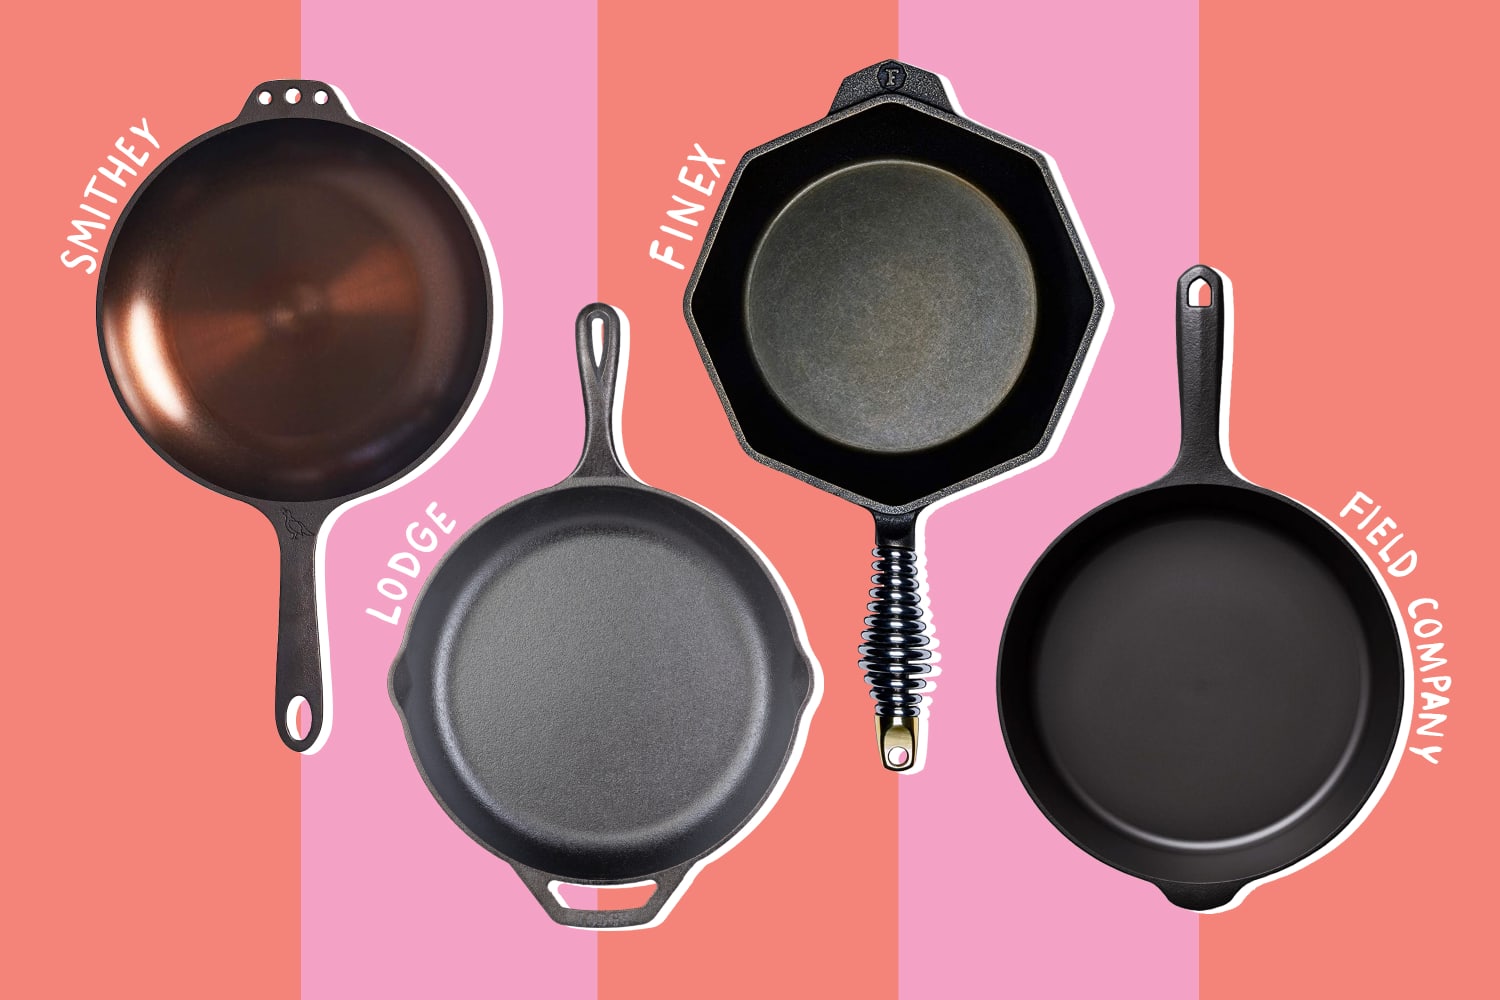 Lodge Cast Iron - ❄️ Introducing our very first limited